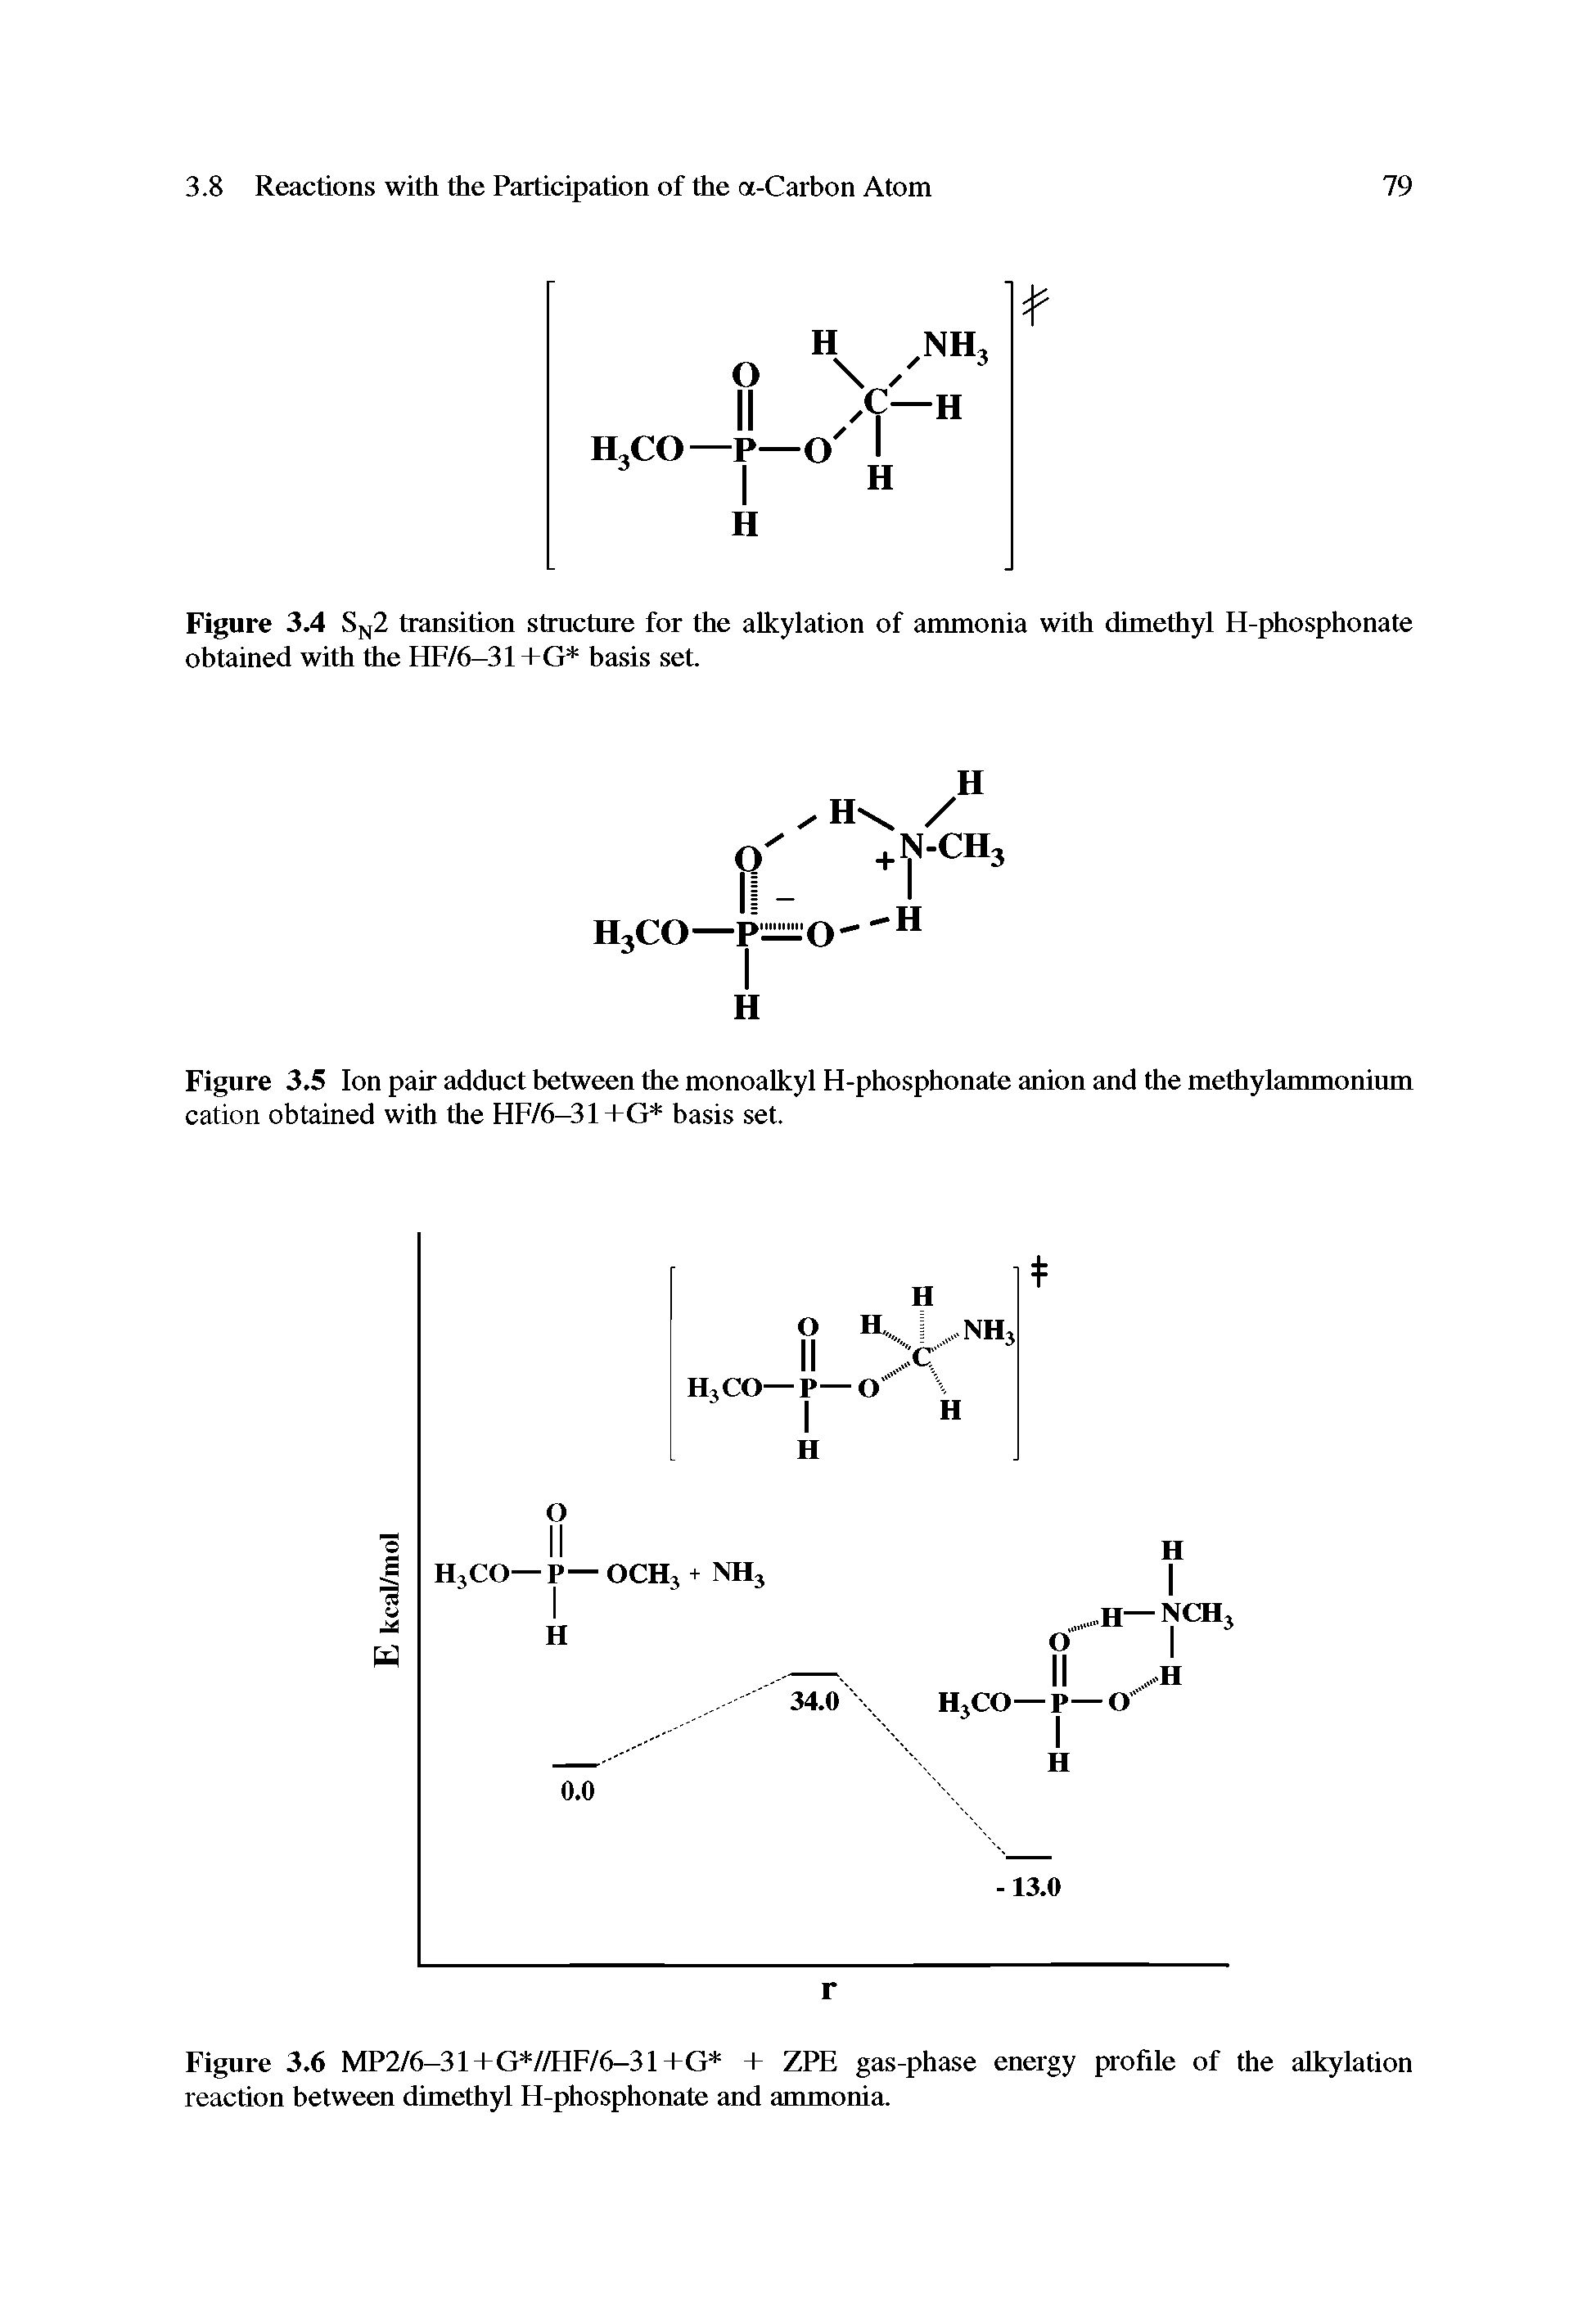 Figure 3.6 MP2/6-31+G //HF/6-31+G + ZPE gas-phase energy profile of the alkylation reaction between dimethyl H-phosphonate and ammonia.